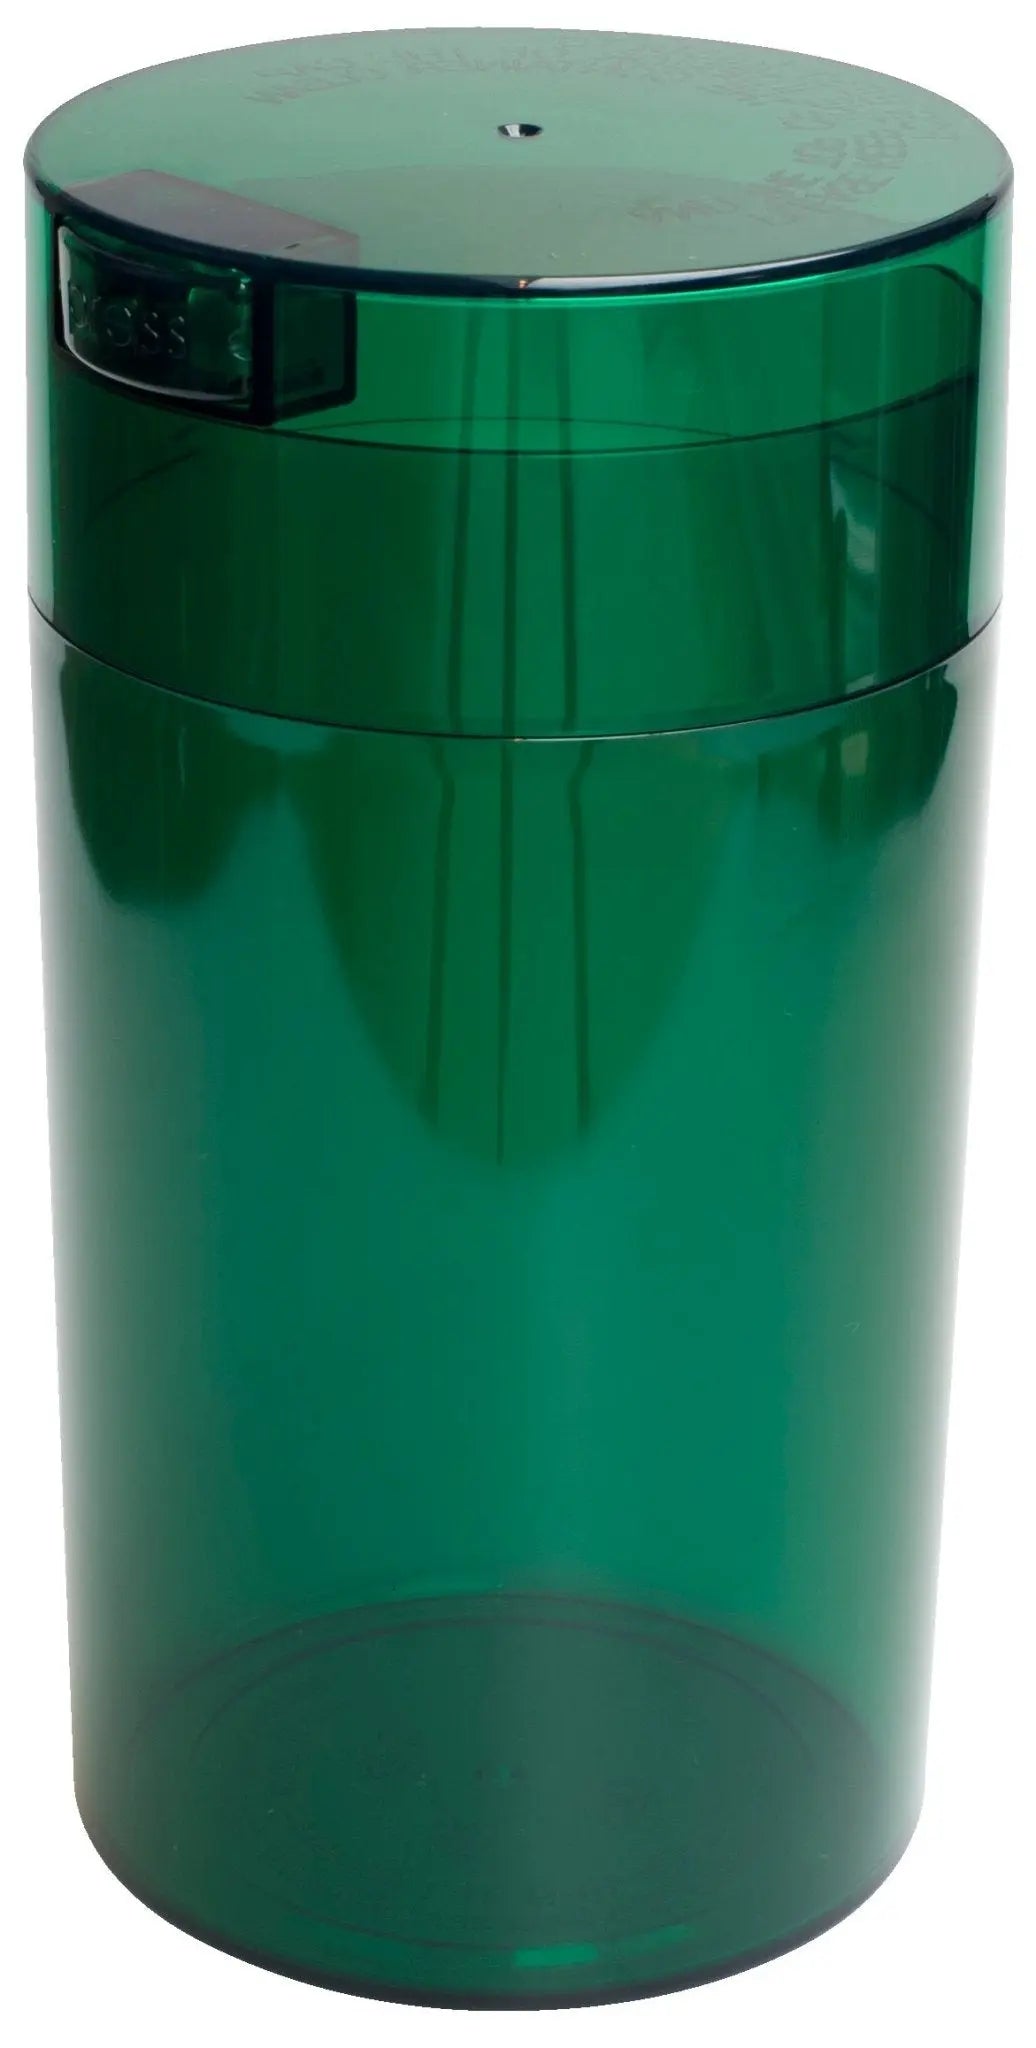 Tightvac 1.3 liter / 340g / Clear / Green Tint - TightVac Europe - The eassiest storage solutions